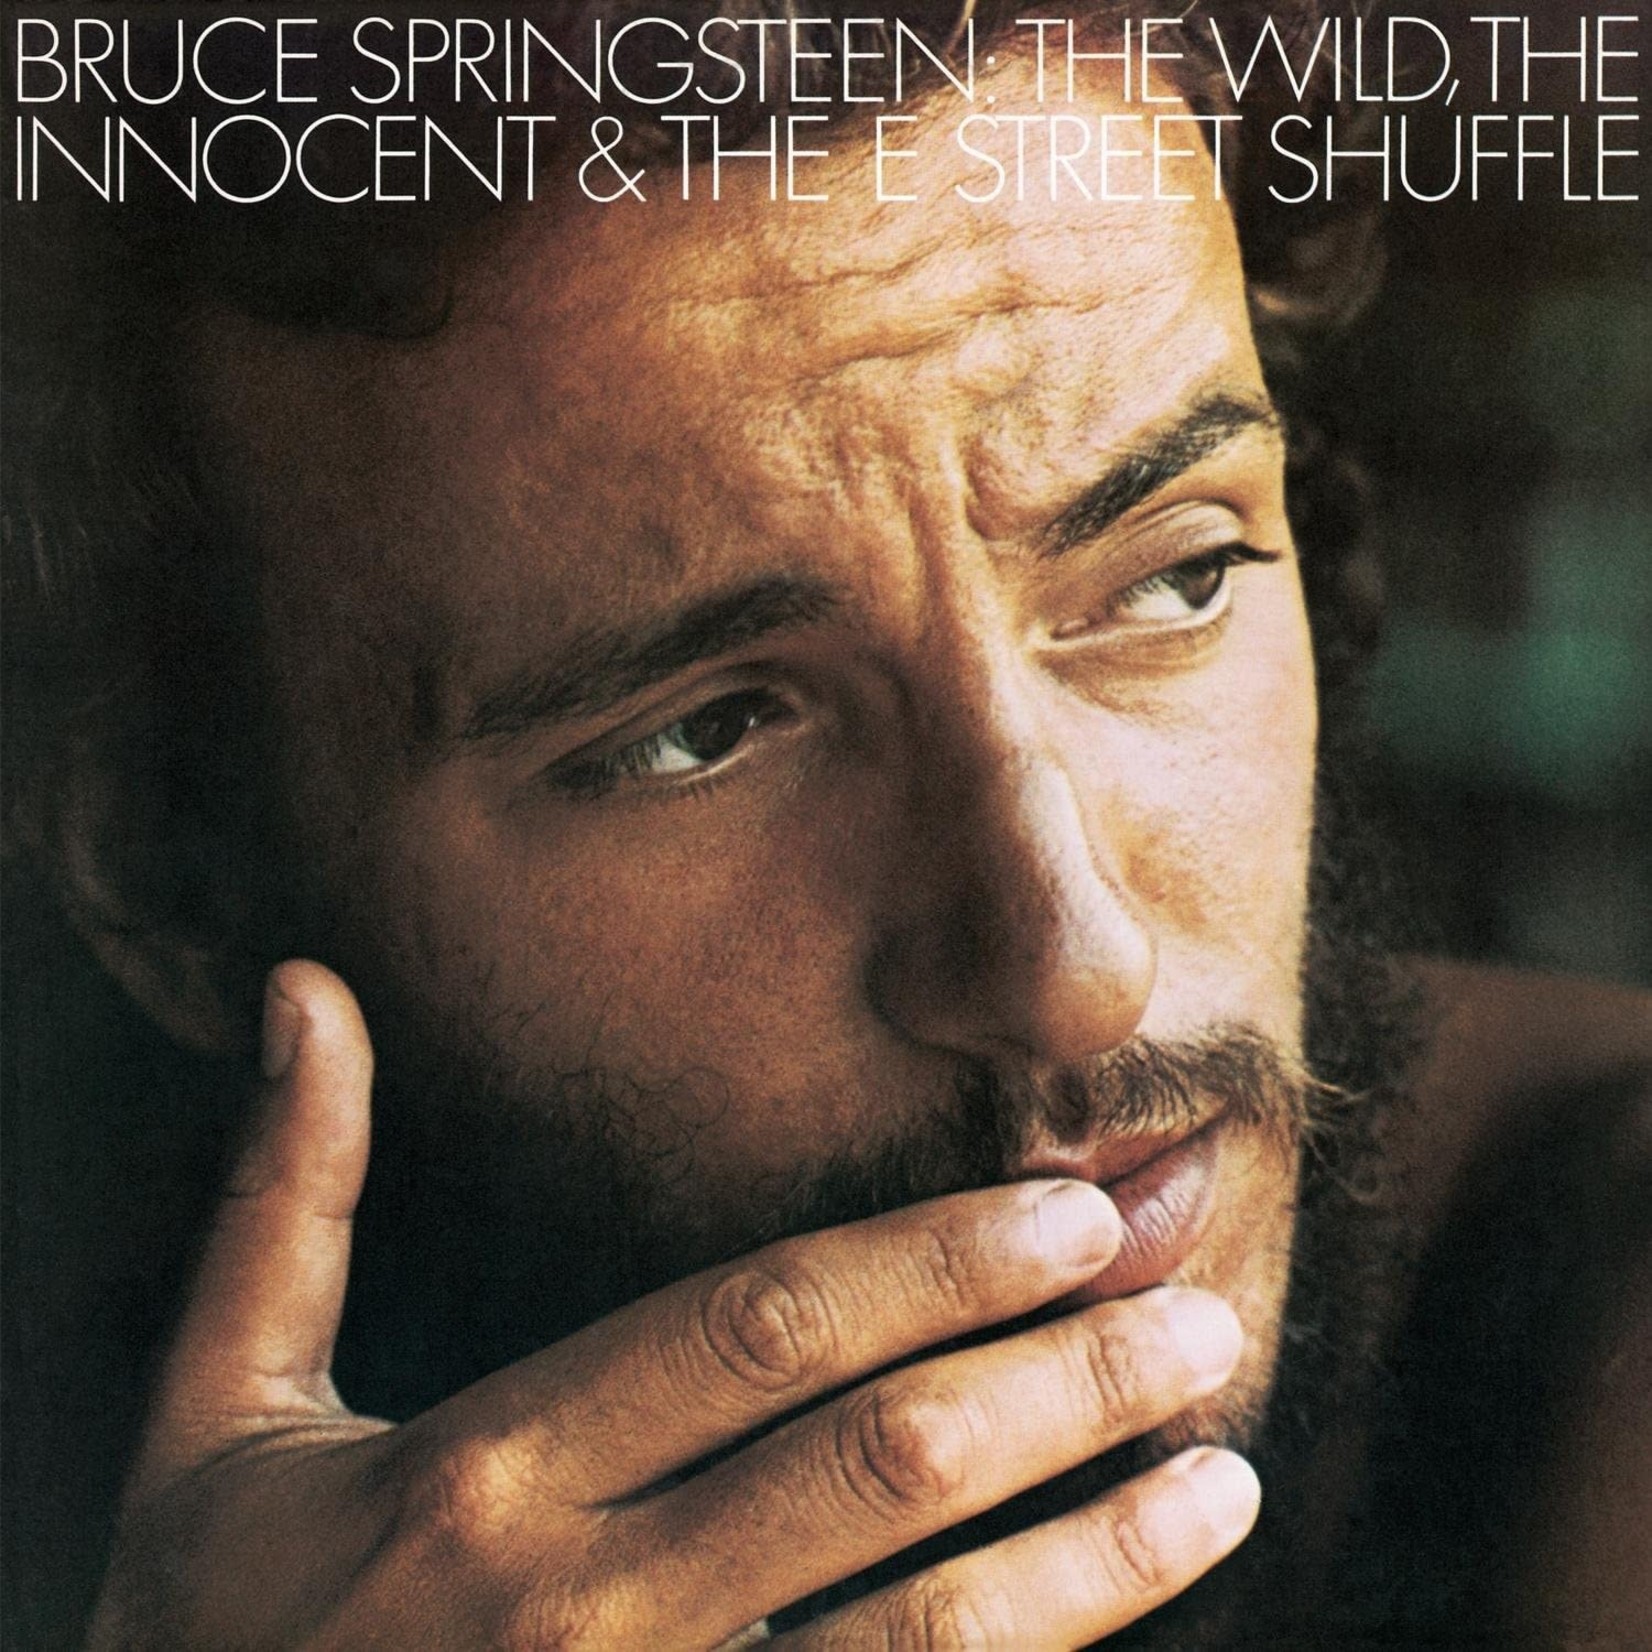 [Vintage] Bruce Springsteen - The Wild, the Innocent & the E-Street Shuffle